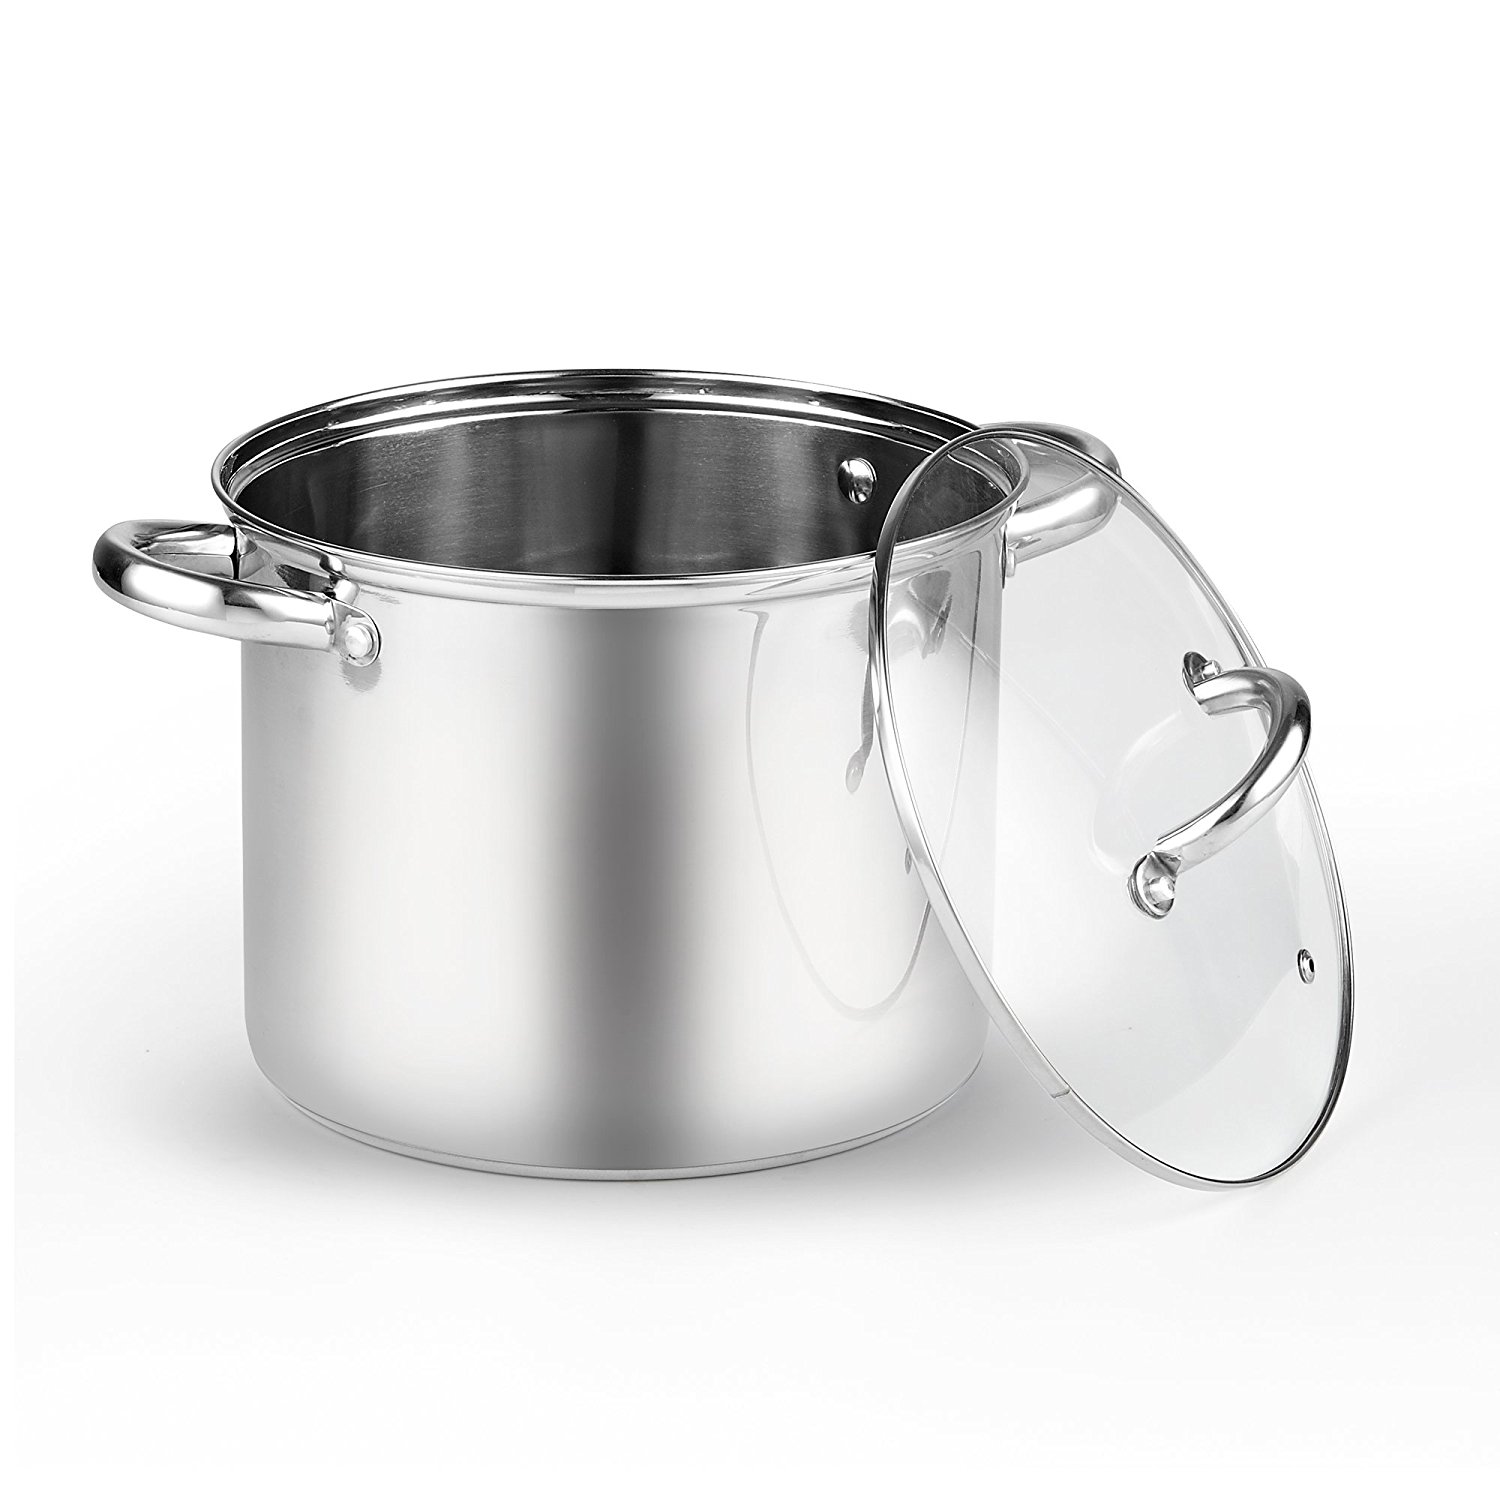 Cook N Home 2480 Stockpot with Lid, 6.5 quarts, Stainless Steel - Stainless Steel Pot